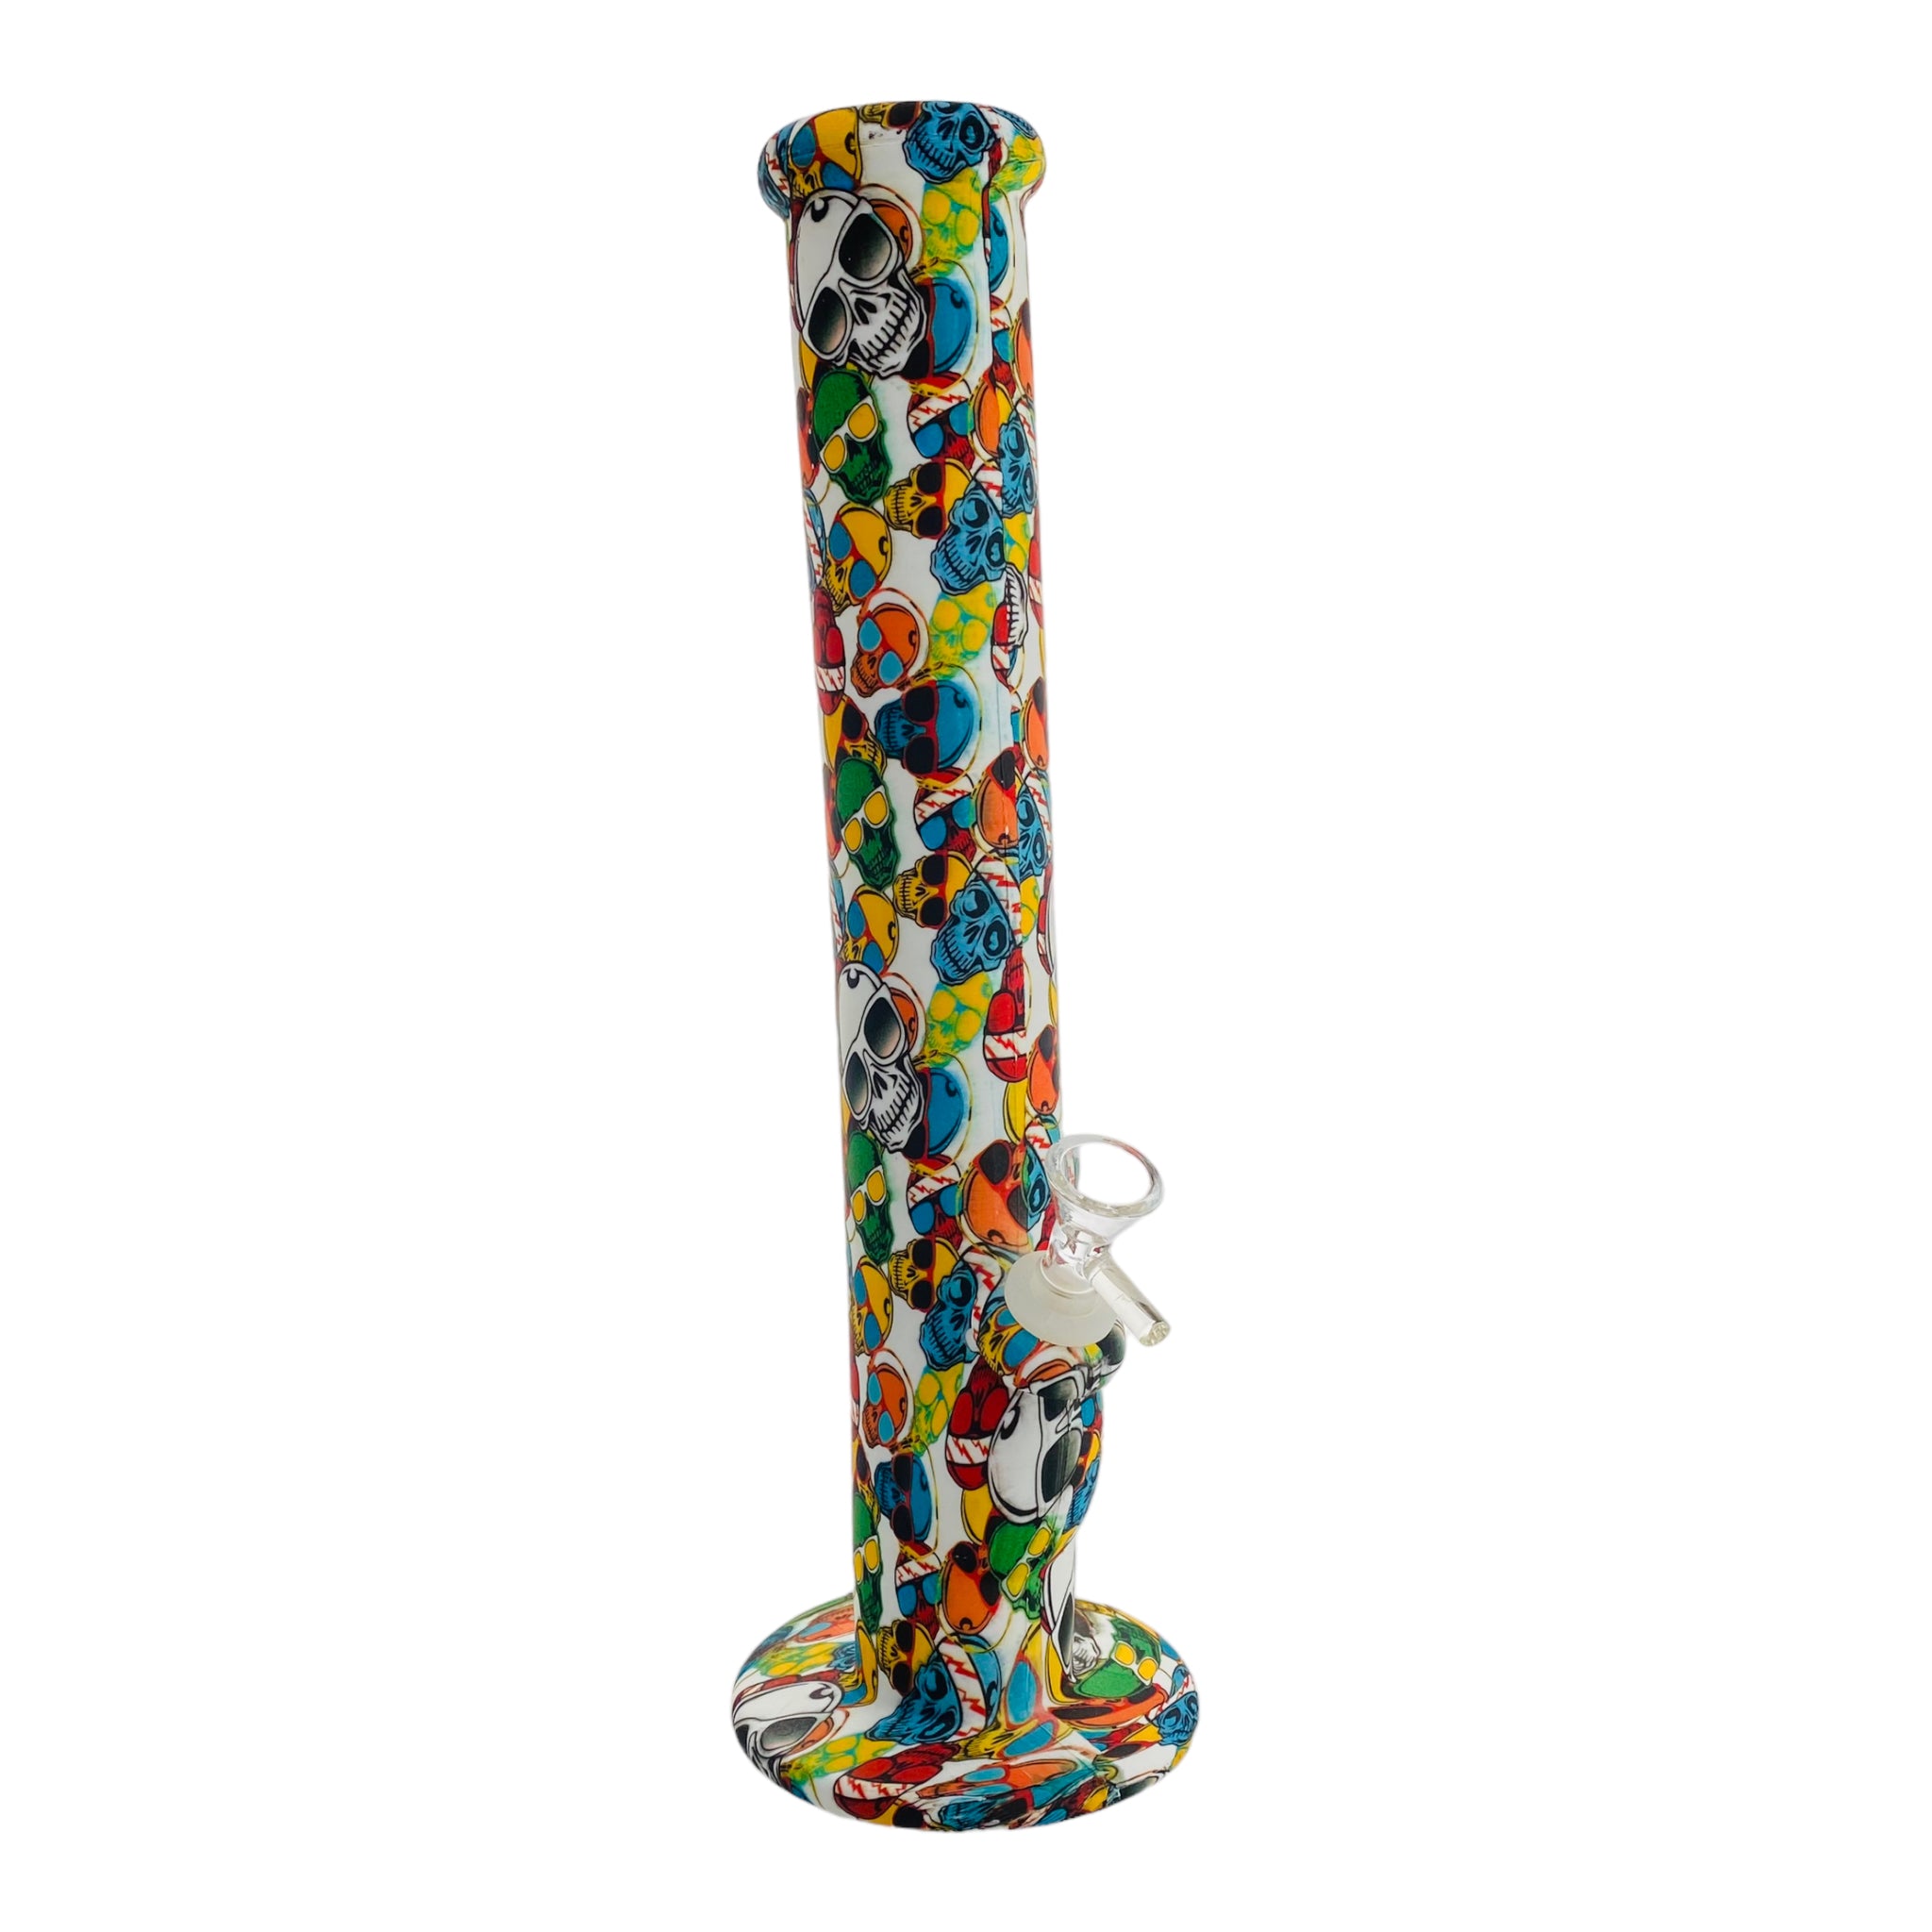 12 Inch Silicone Straight Bong With Colorful Skulls With Sunglasses